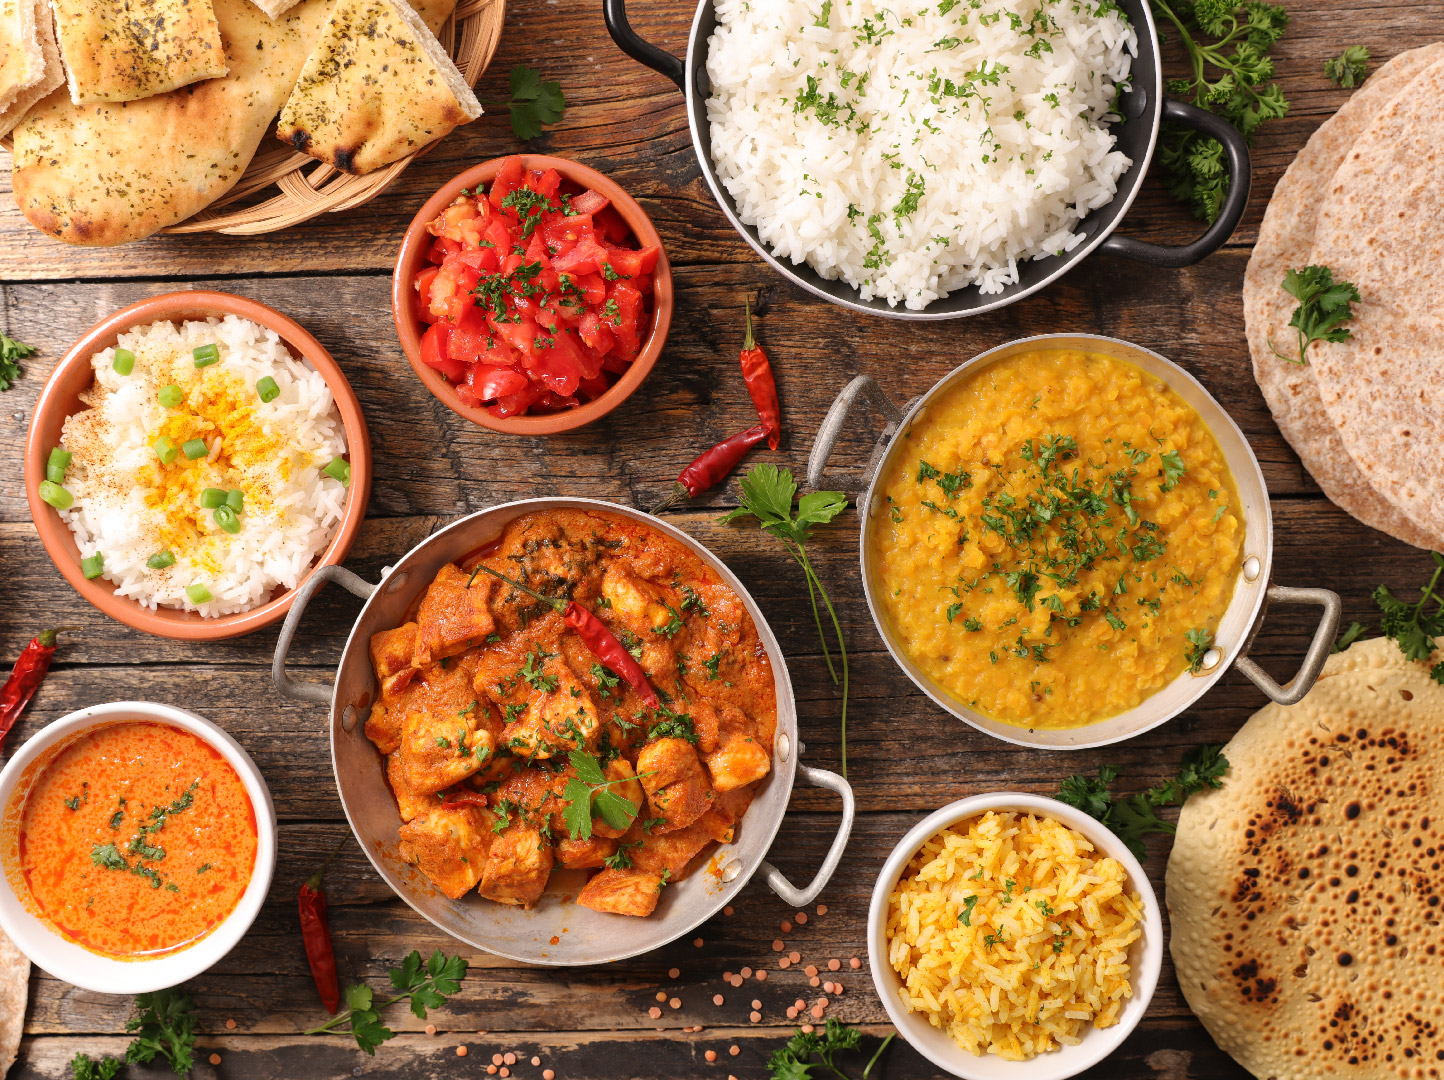 Journey Through the Flavors of India at our Indian Restaurant